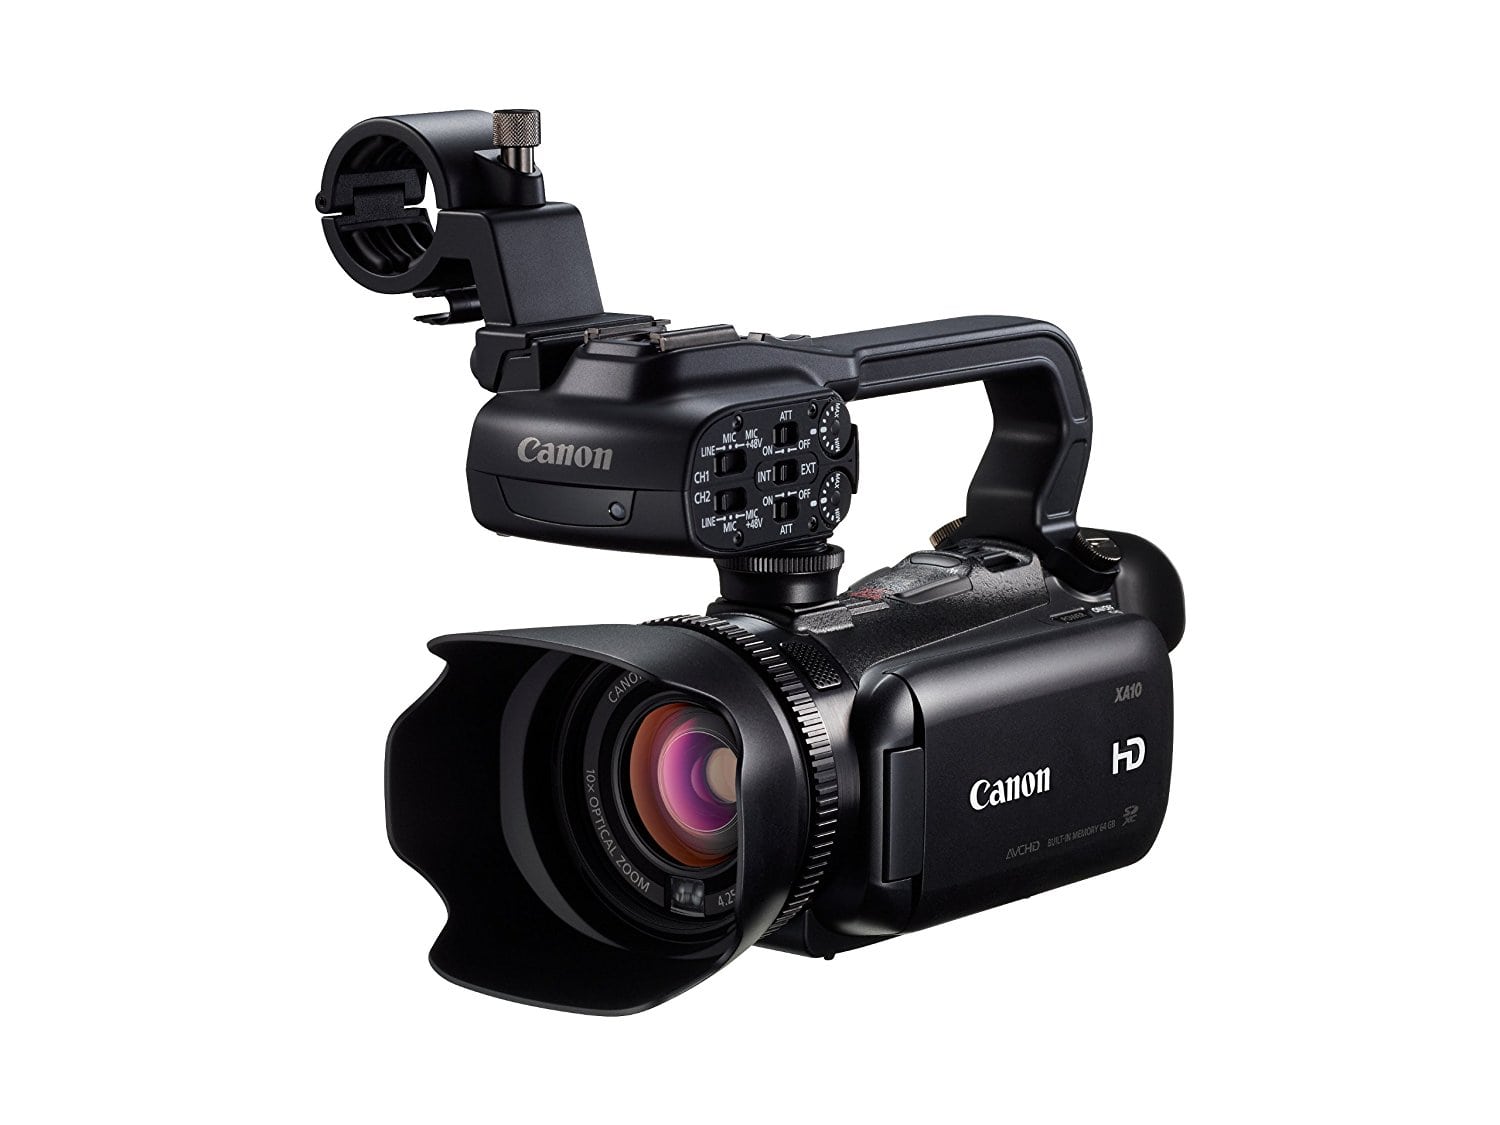 Best Camcorder for YouTube Videos